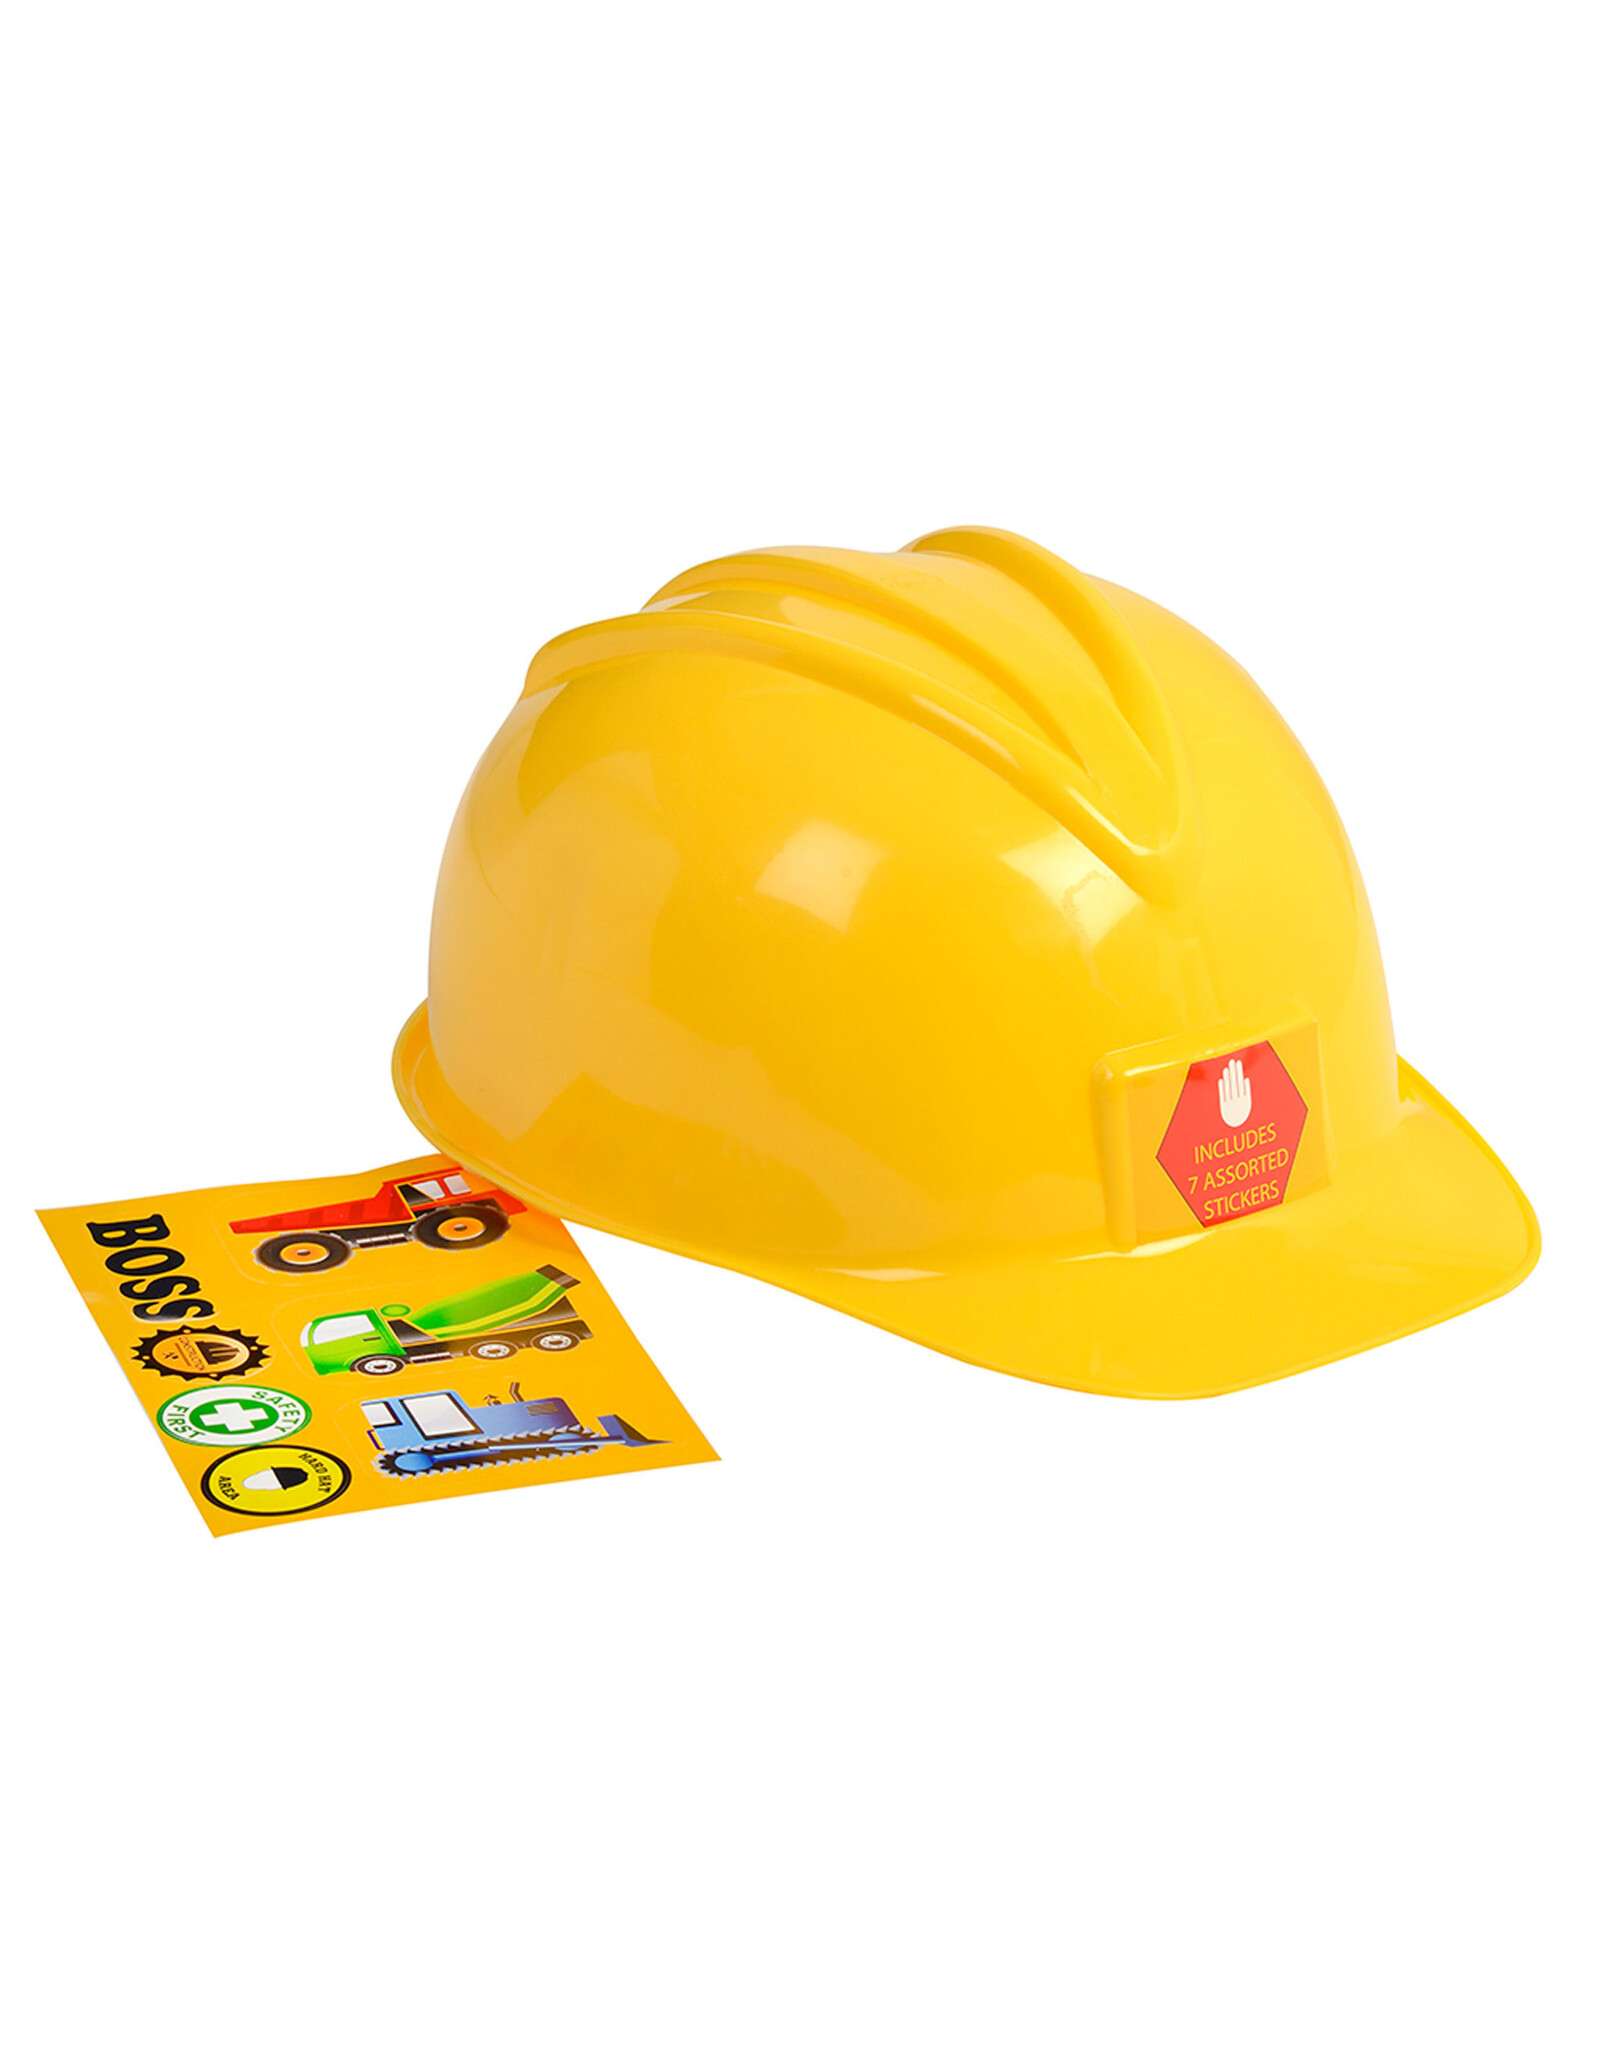 Aeromax Jr. Construction Helmet with assorted stickers